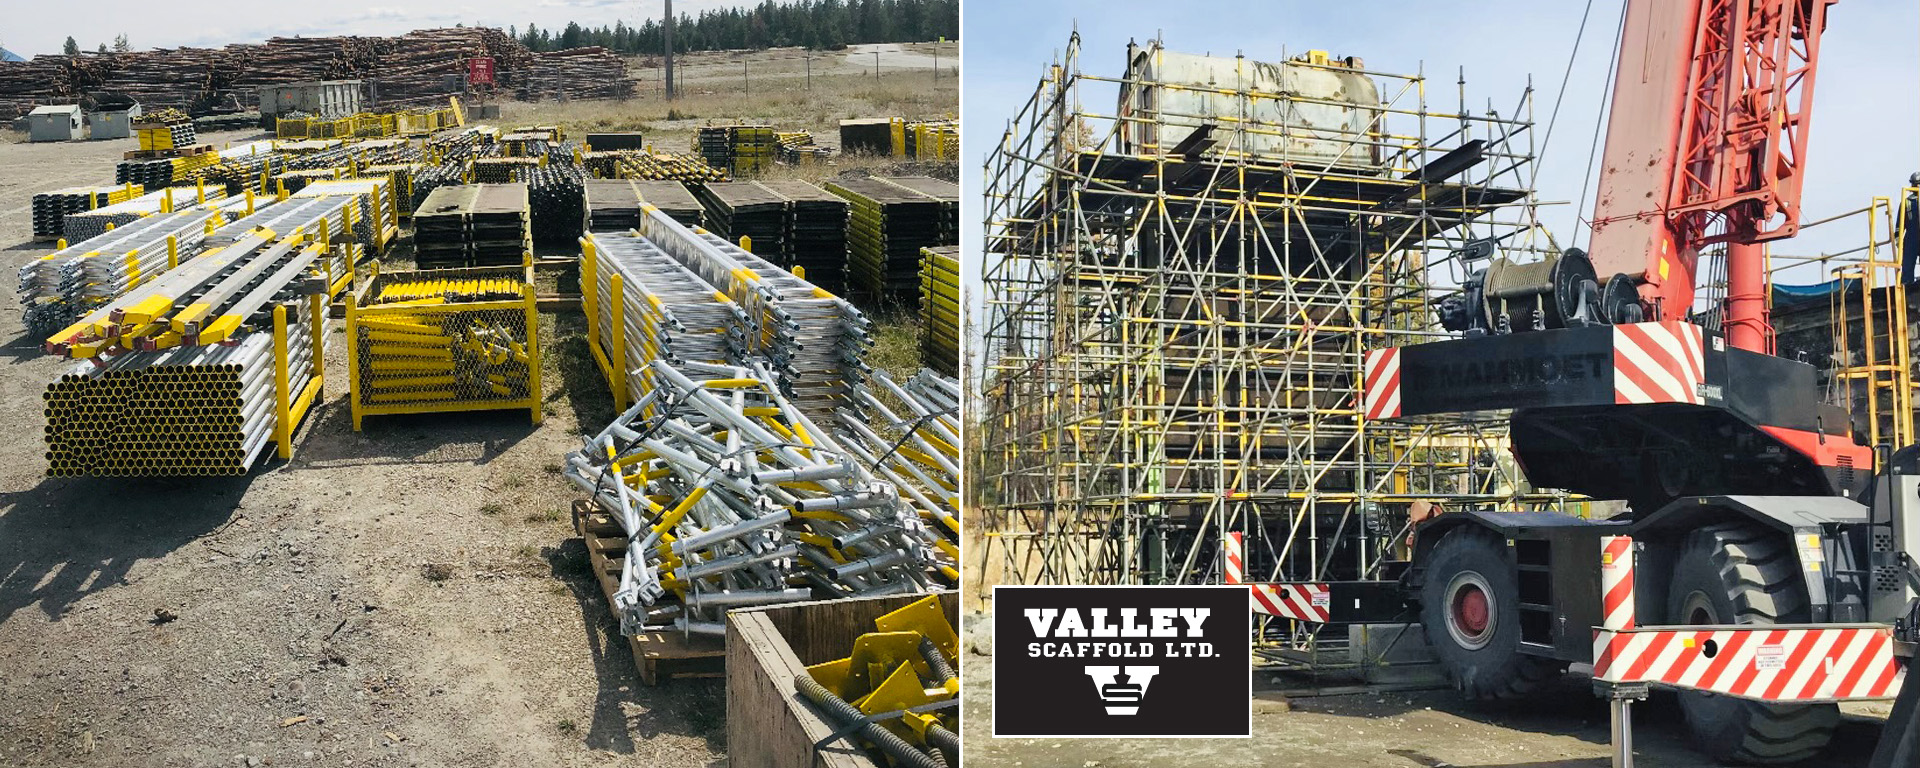 Two images side-by-side, showing scaffolding materials on the left and assembled scaffolding on the right 